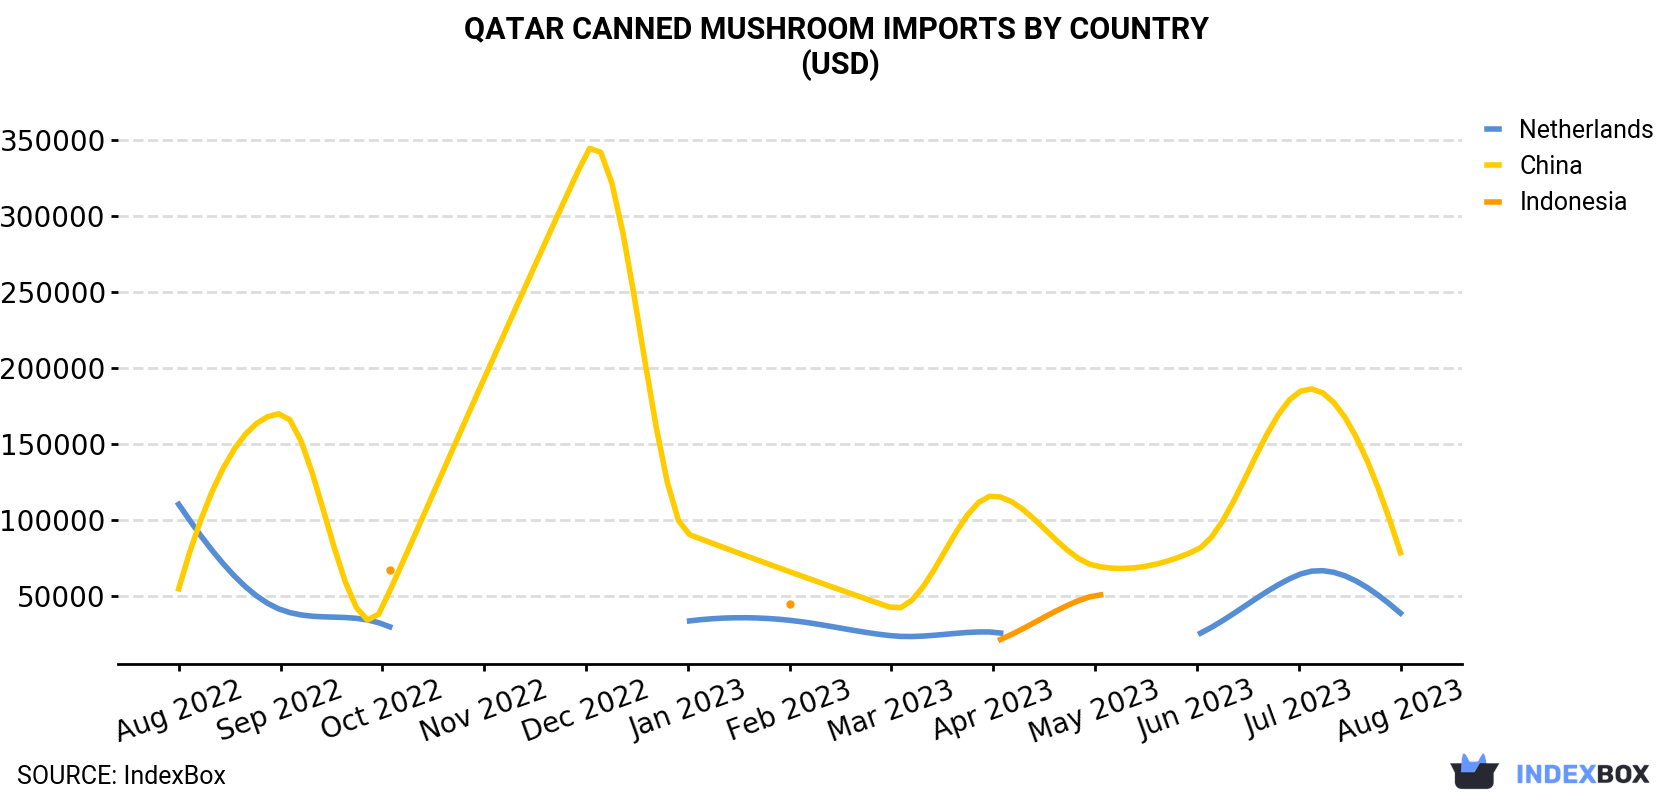 Qatar Canned Mushroom Imports By Country (USD)